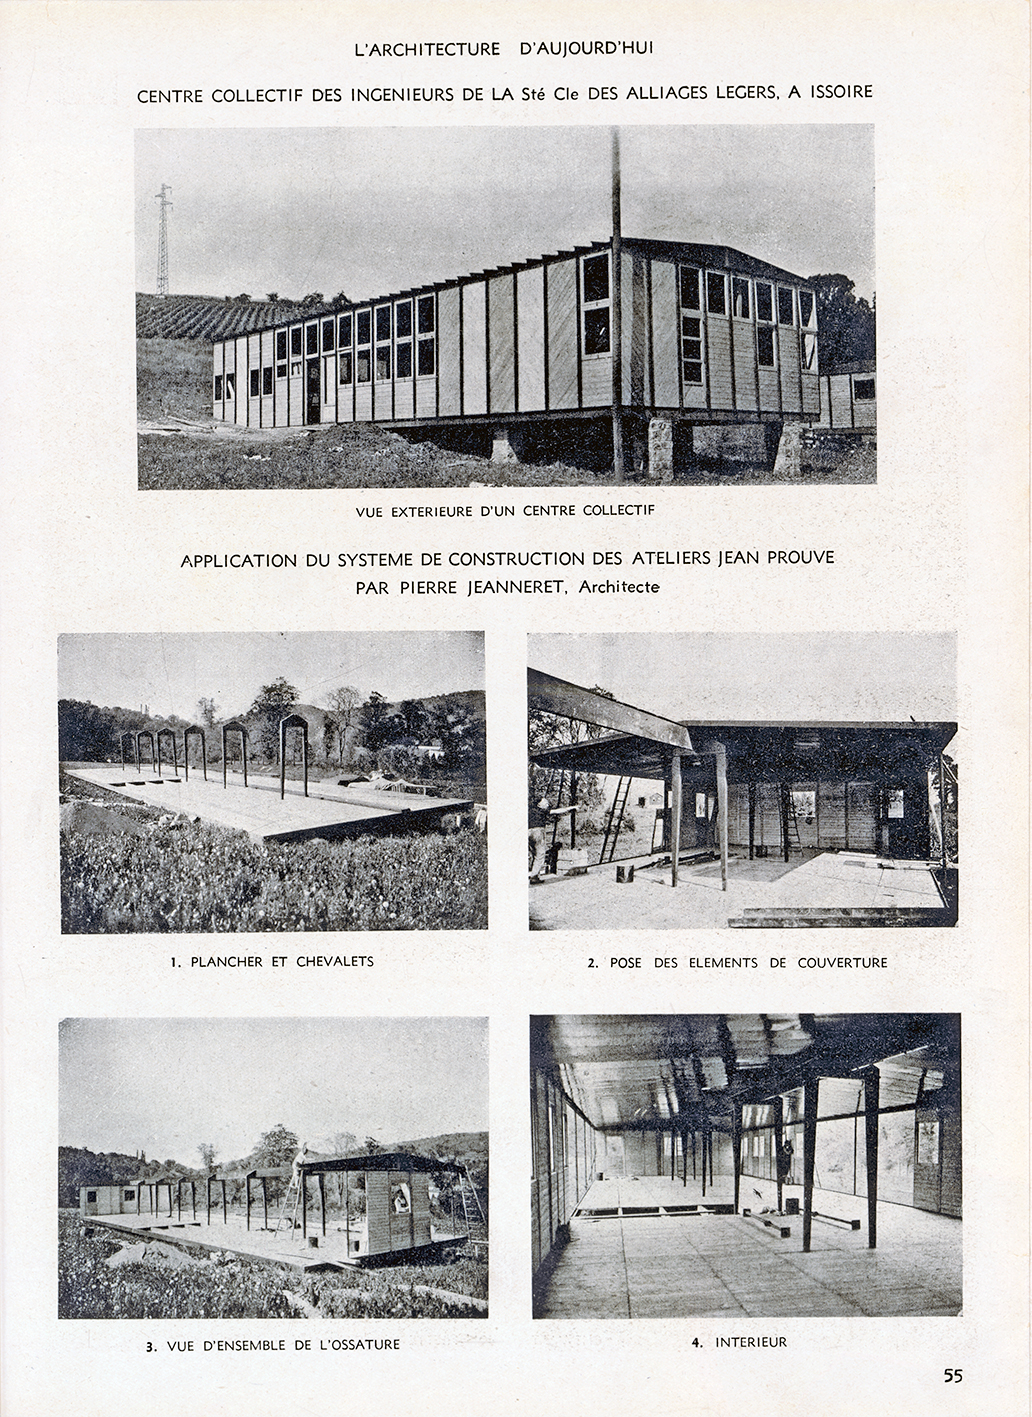 “Communal centre for the SCAL engineers in Issoire. Application of the Ateliers Jean Prouvé constructive system by Pierre Jeanneret, architect”. Emergency Solutions, <i>L’Architecture d’aujourd’hui,</i> no. 2, July–August 1945.